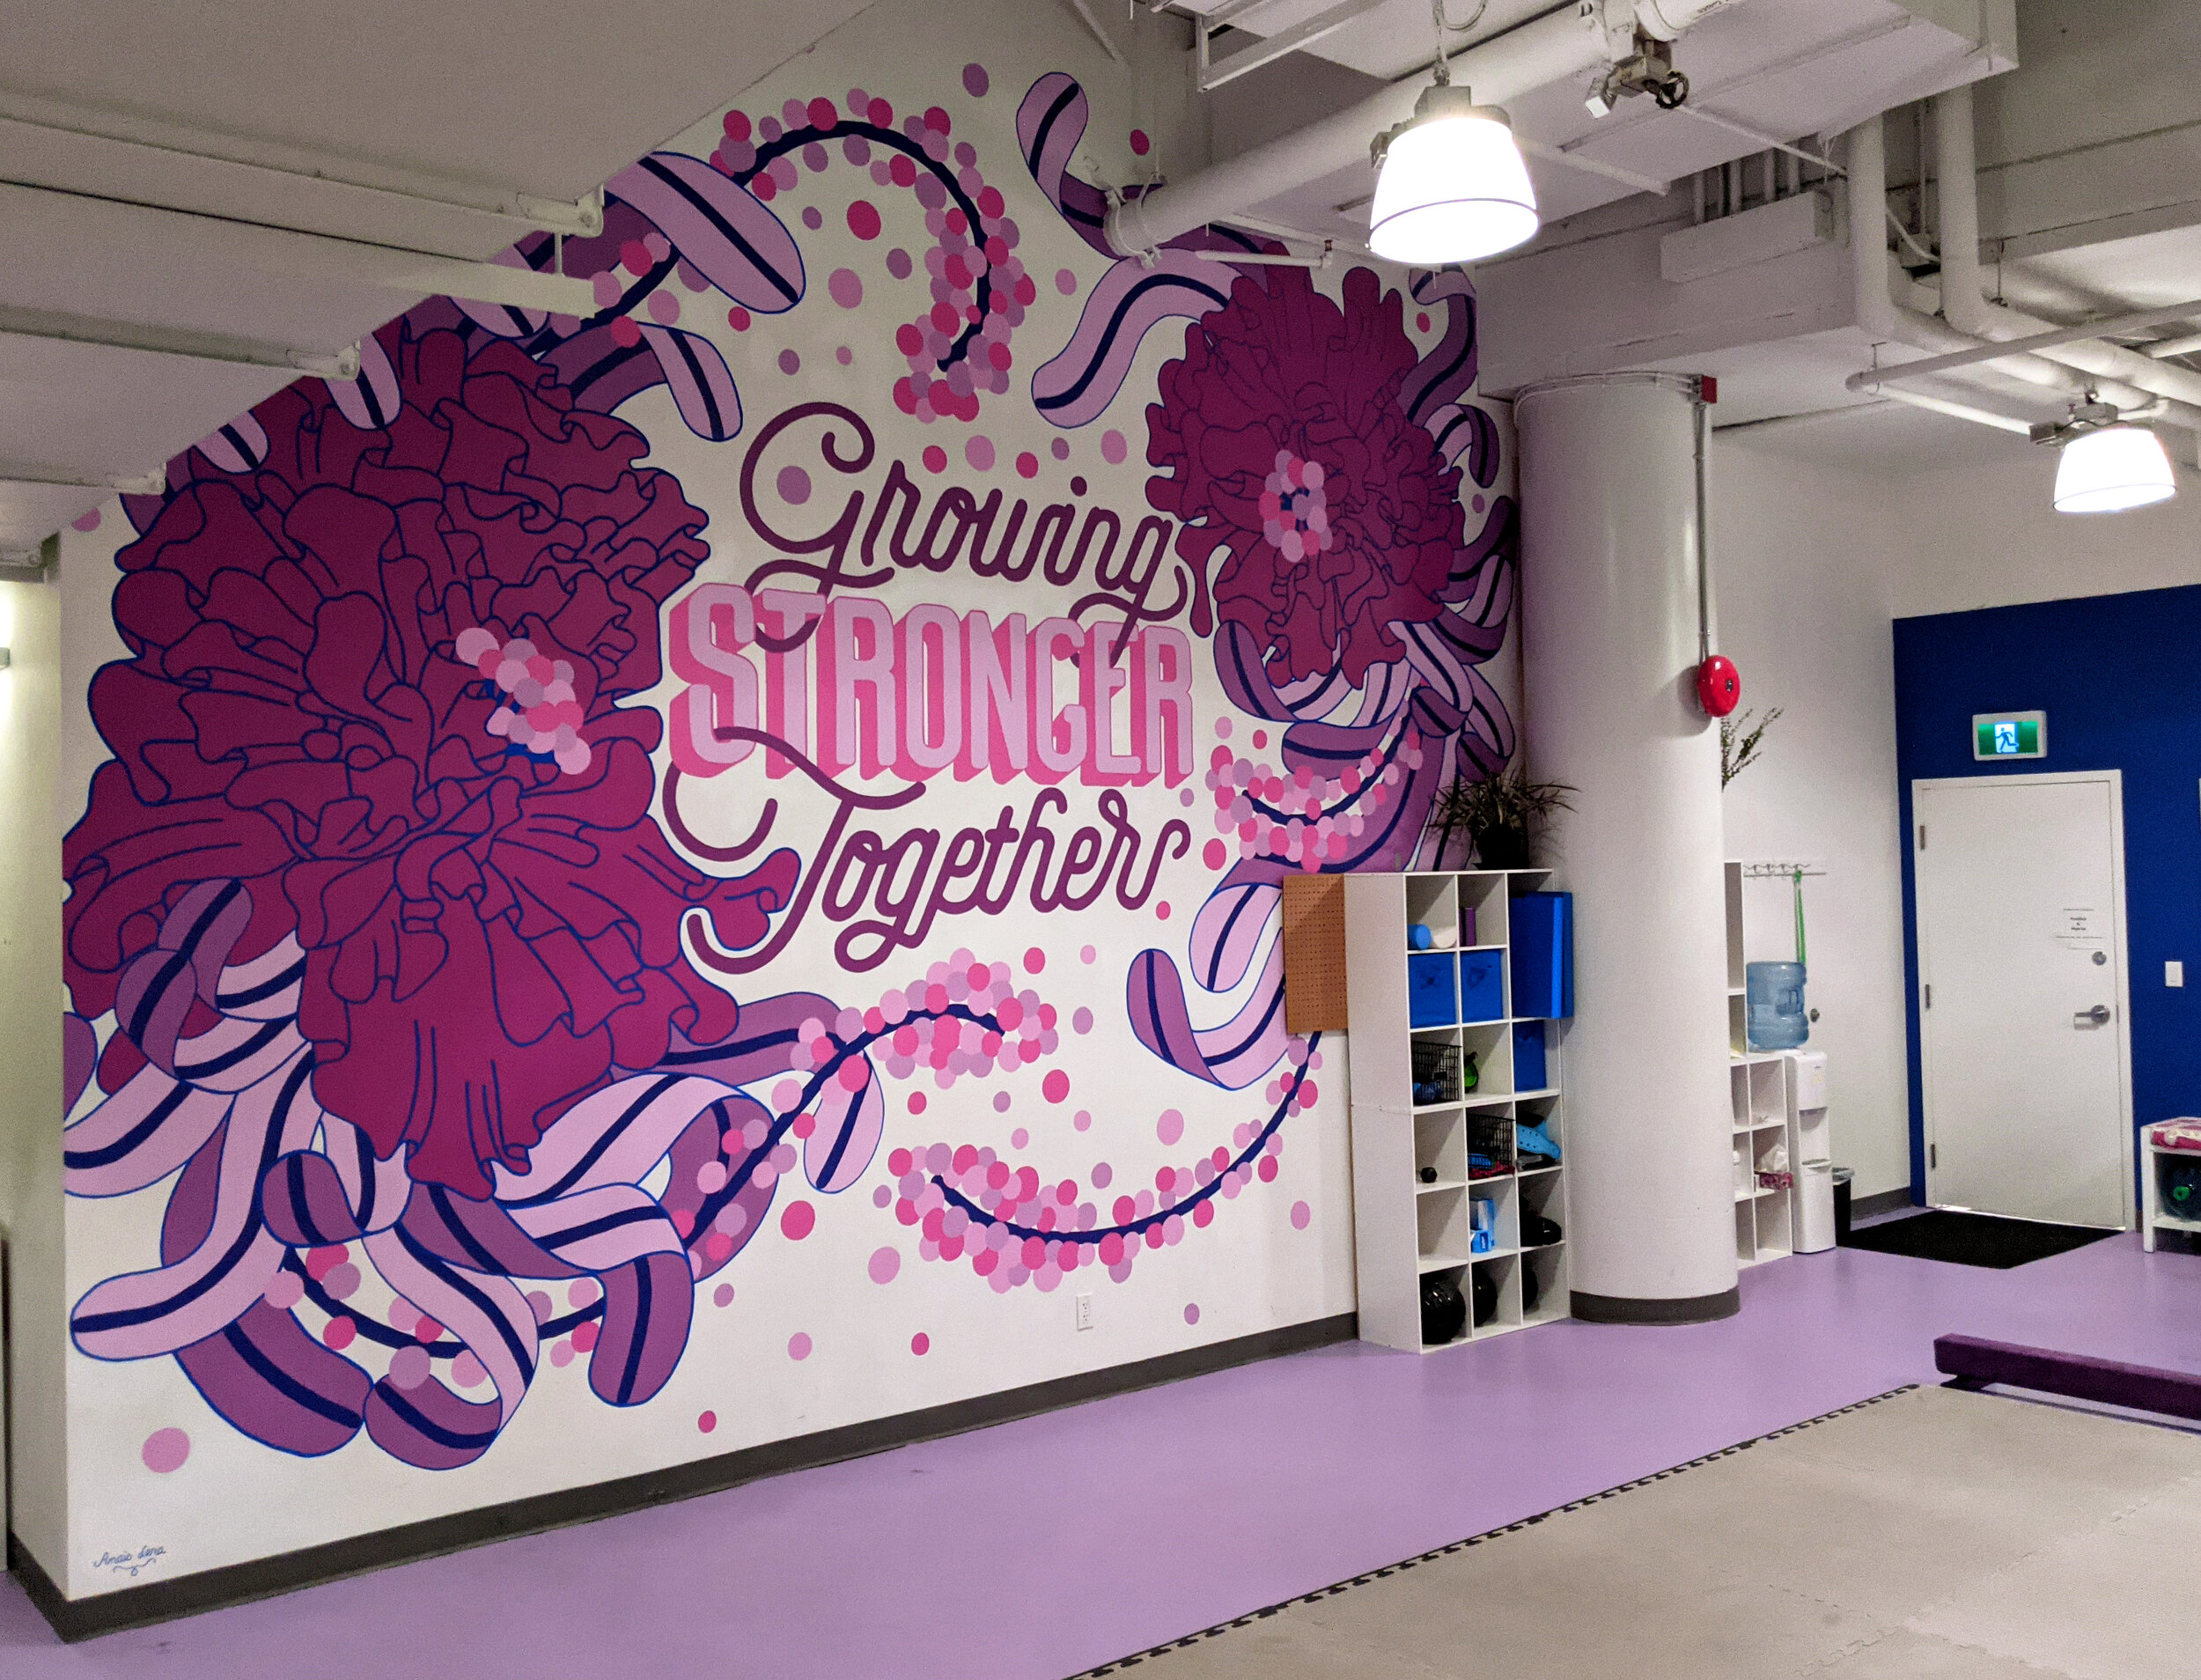  “Growing Stronger Together”   15’x16’  Acrylic Paint  VANCOUVER, BC, Canada - 2021   Client: Witness the Fitness Gym Studio 